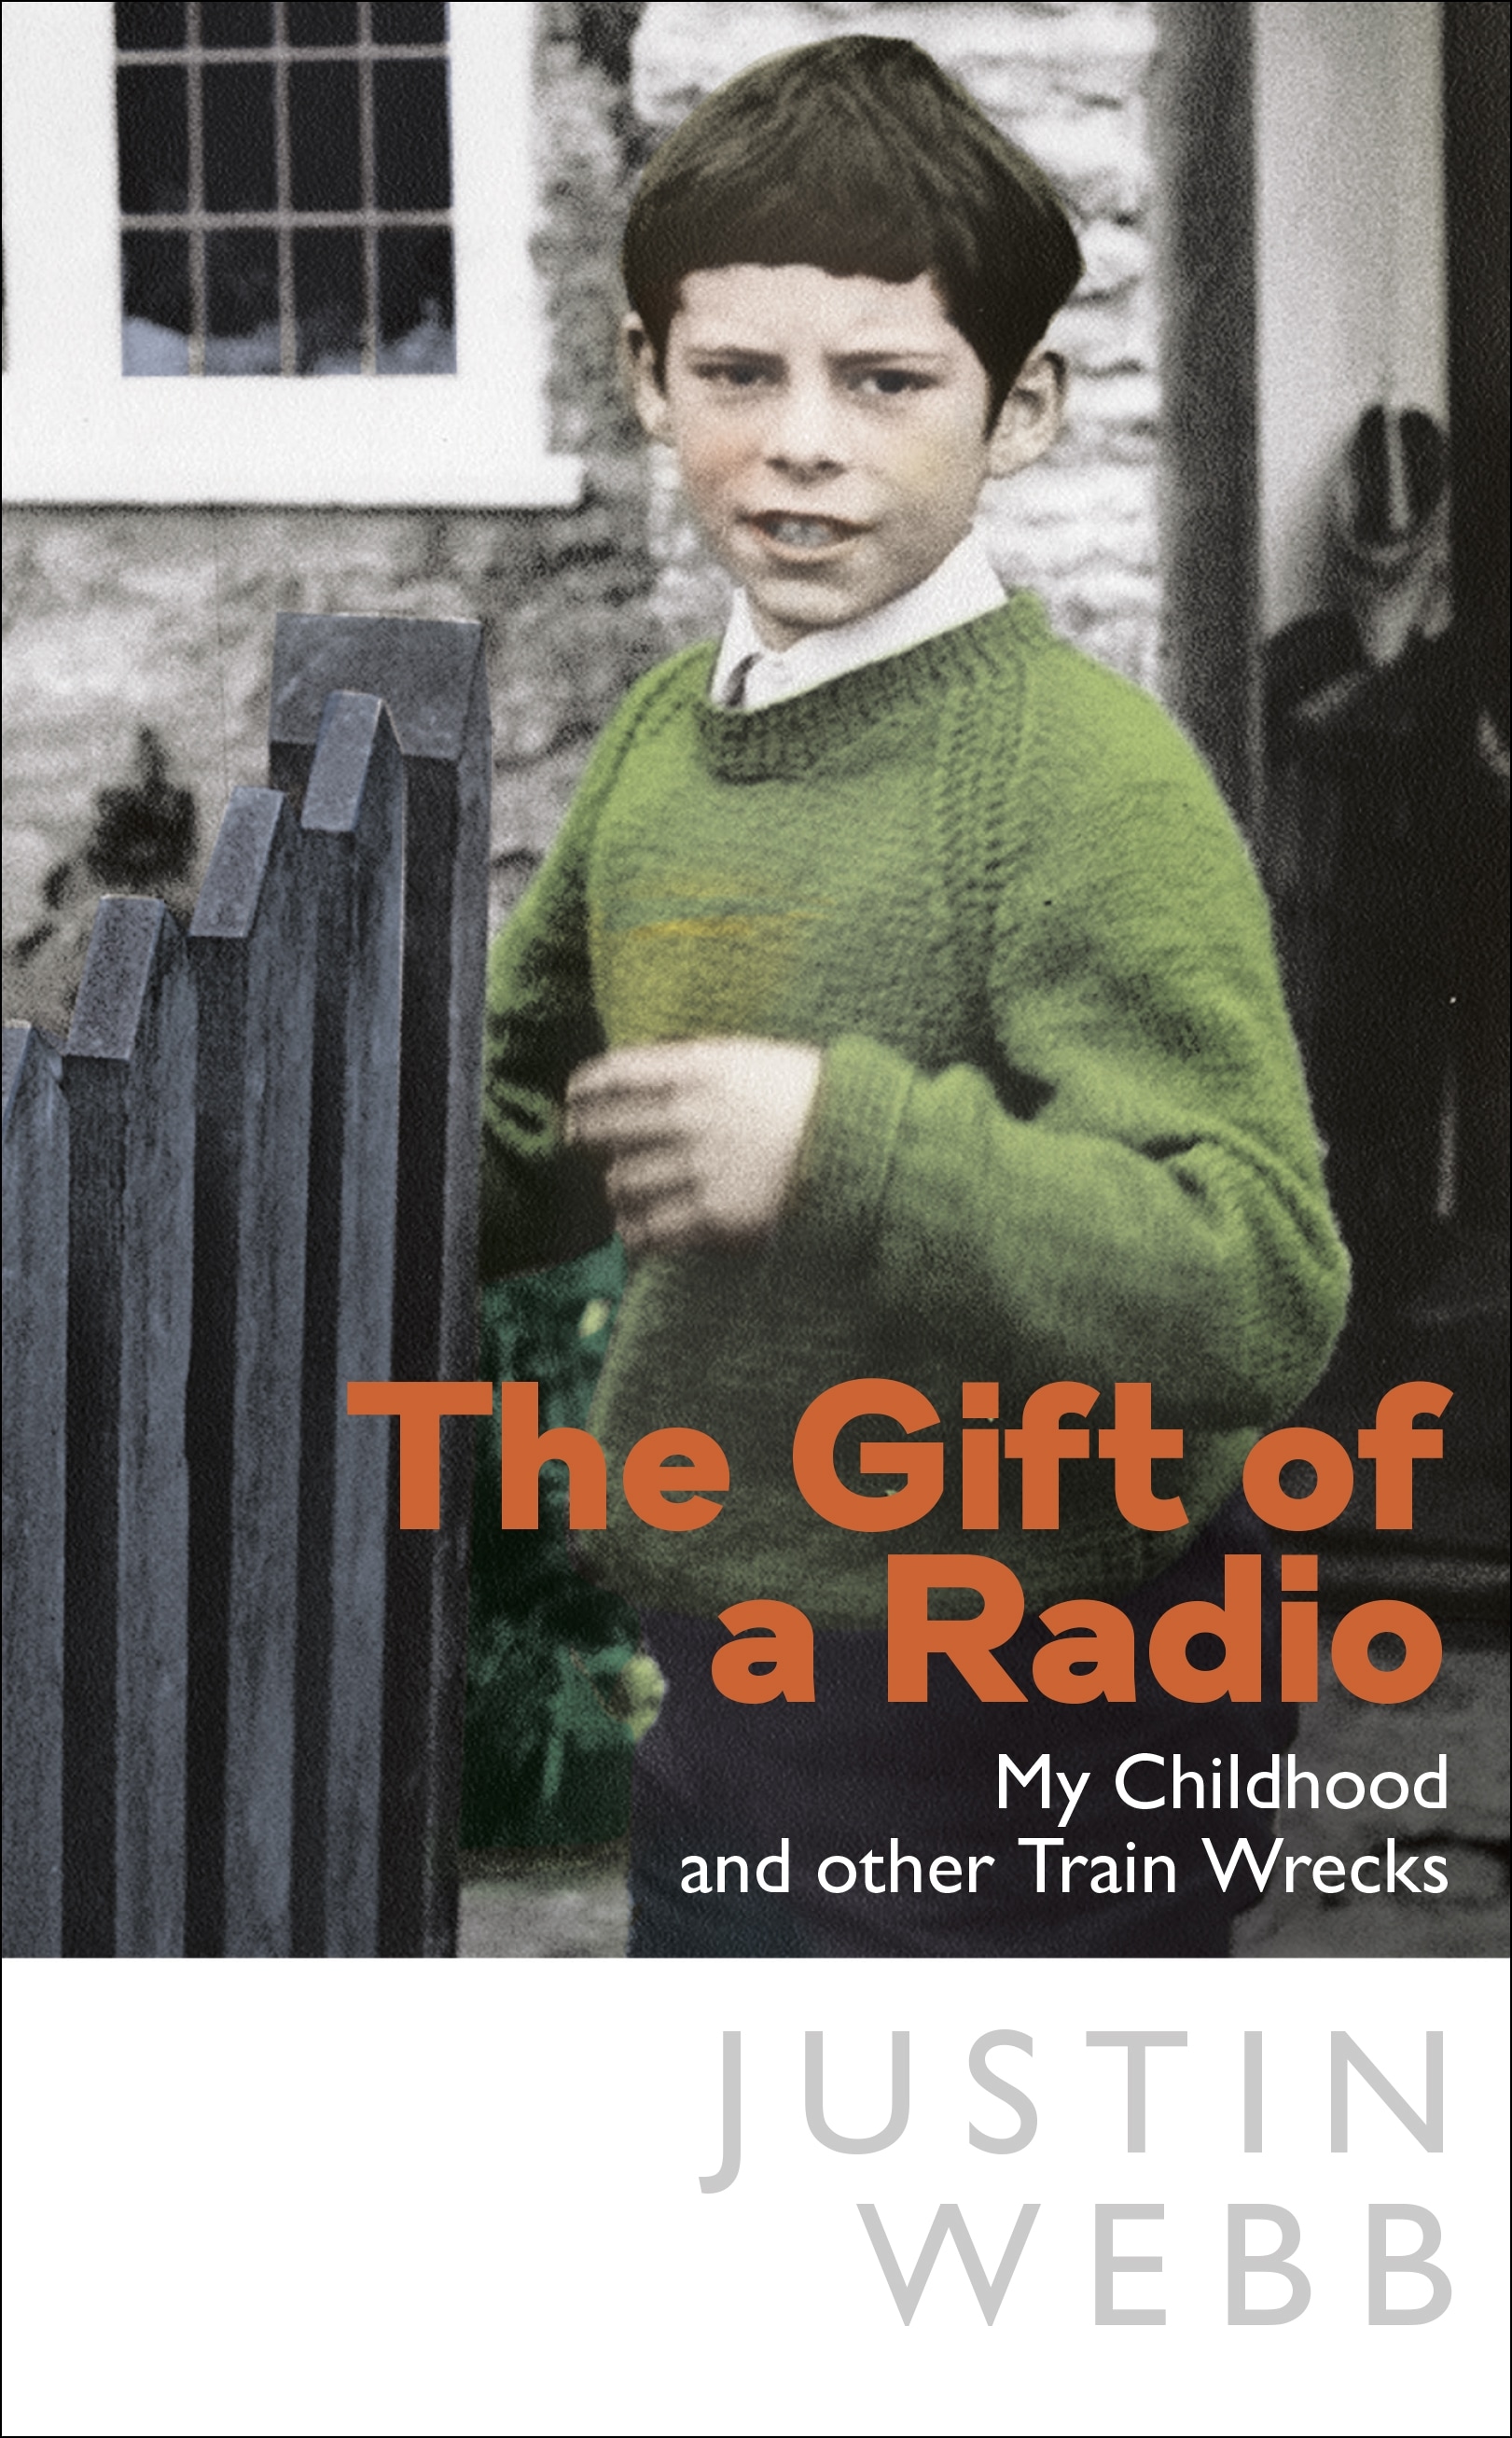 Book “The Gift of a Radio” by Justin Webb — February 10, 2022